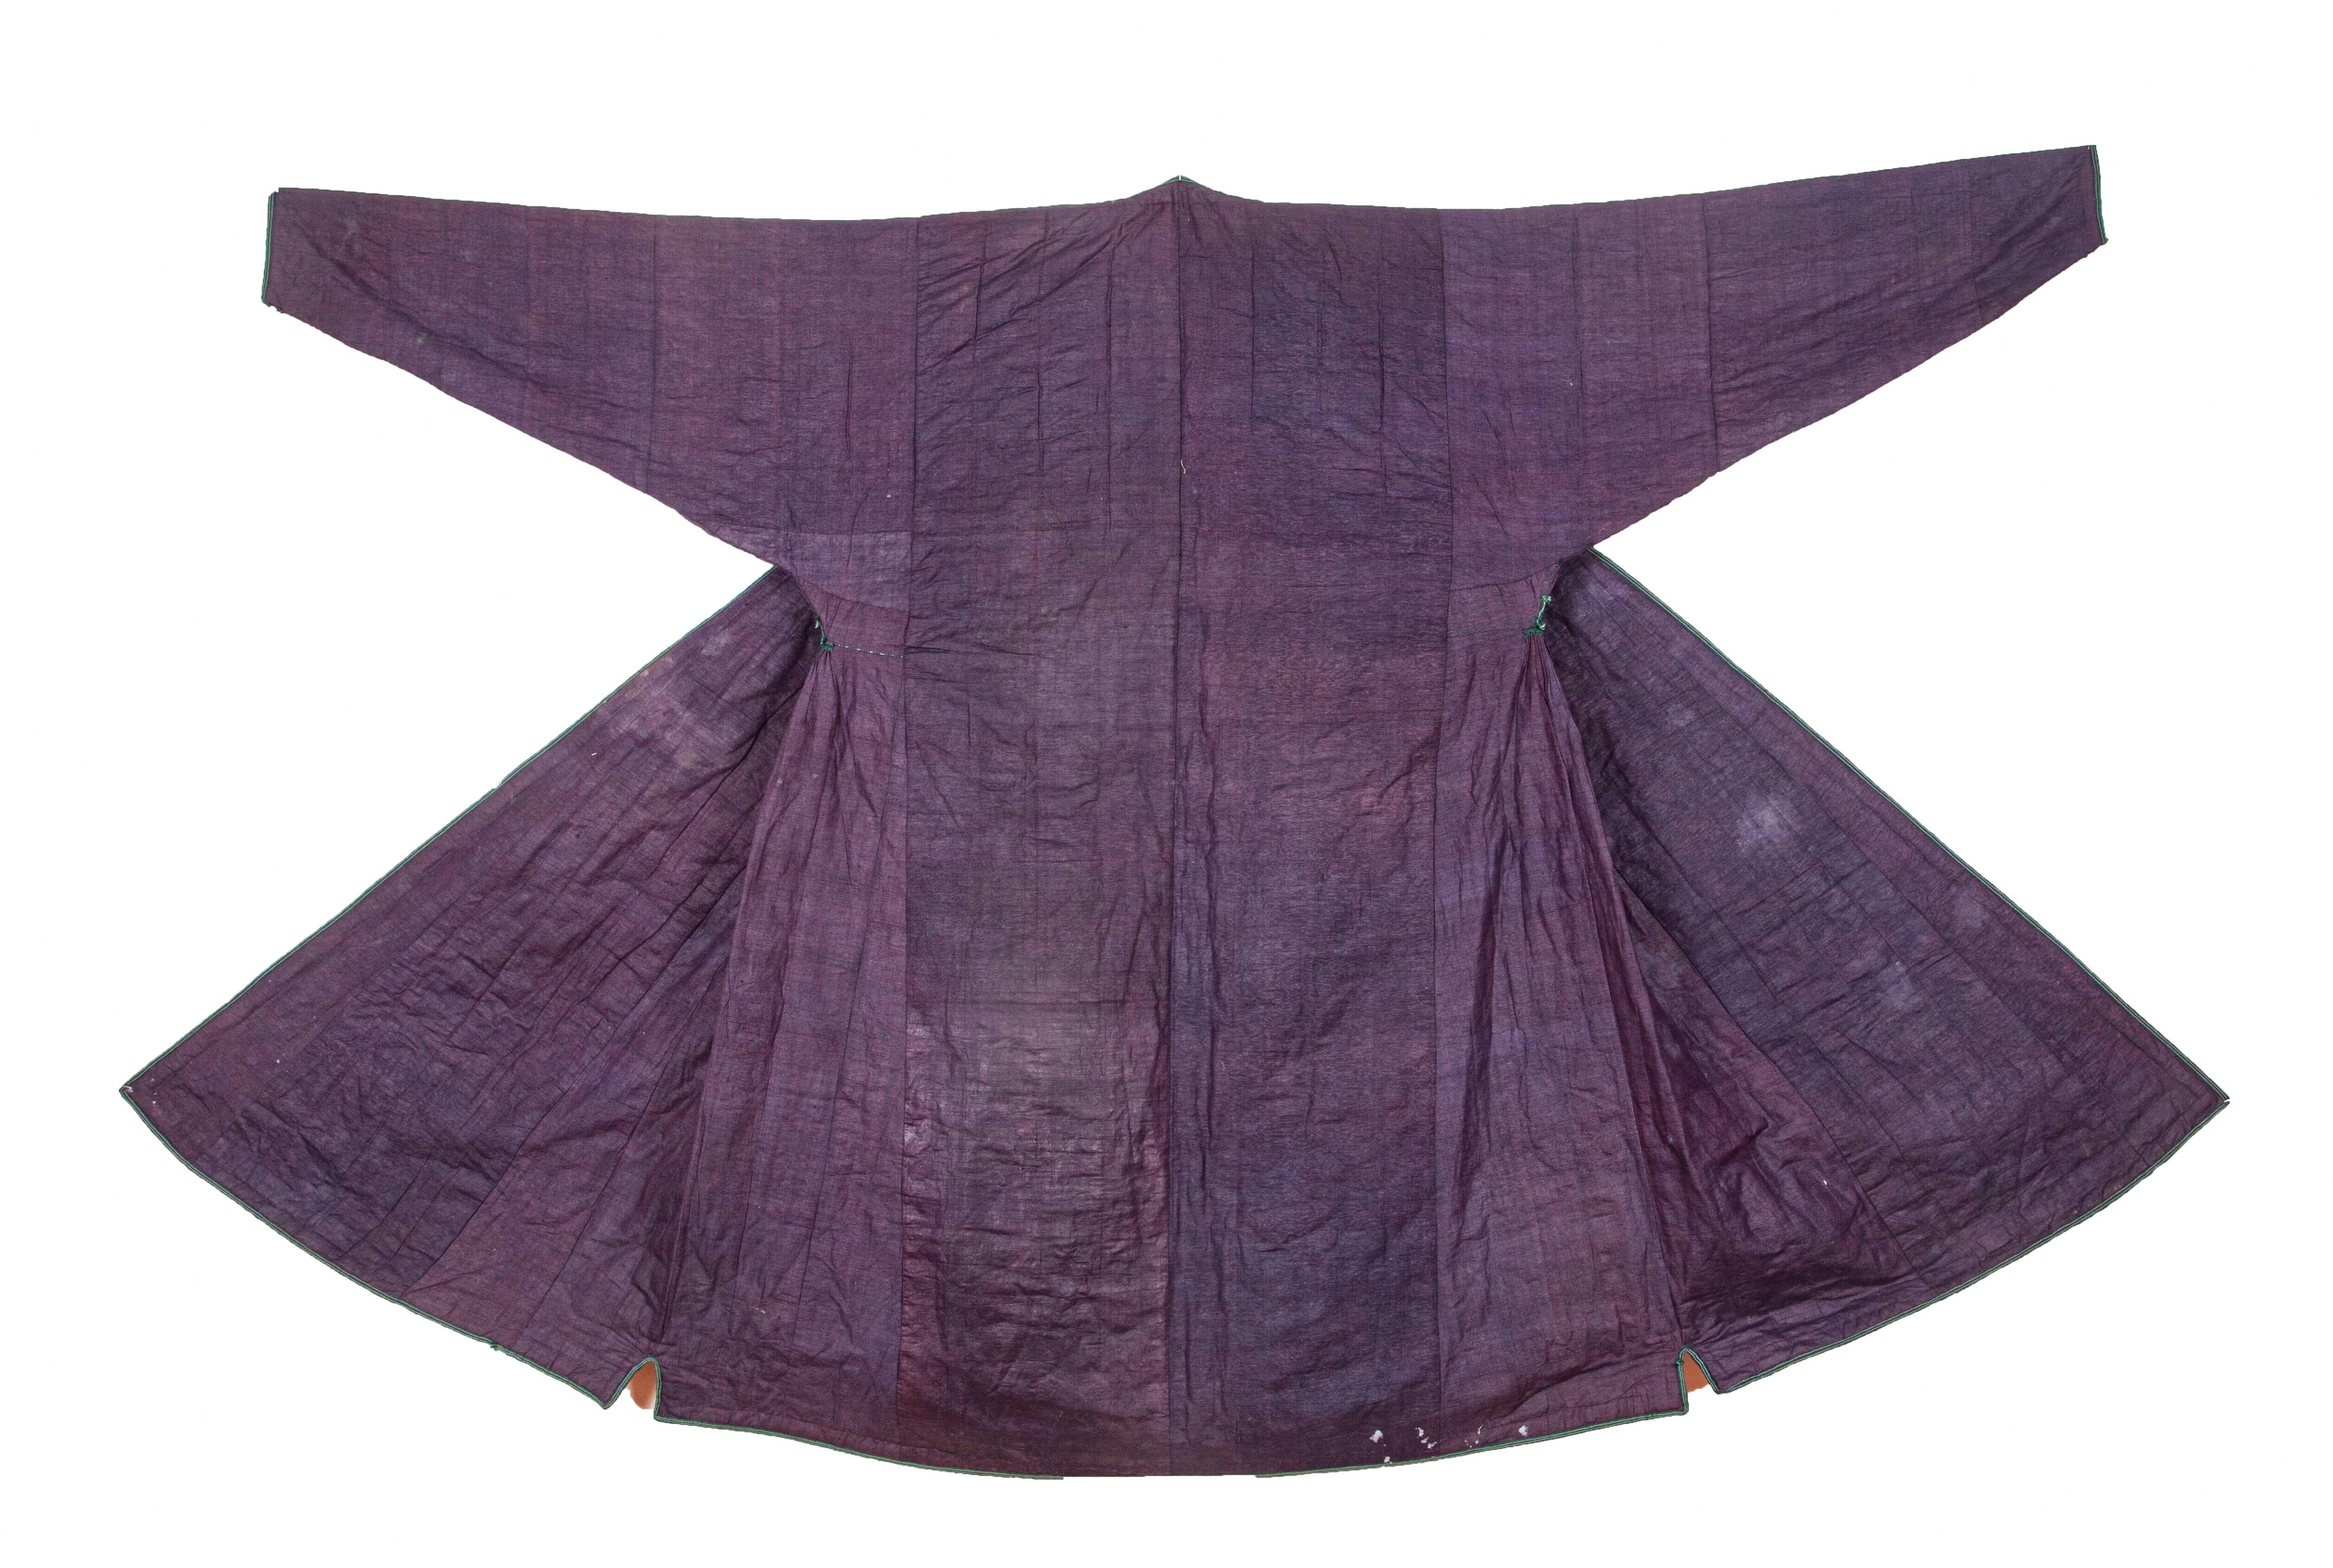 The surface of this chapan is plain handwoven purple silk and the lining is handwoven cotton in indigo block printed by hand.
The condition is superb for the age, both a collector's and users item.